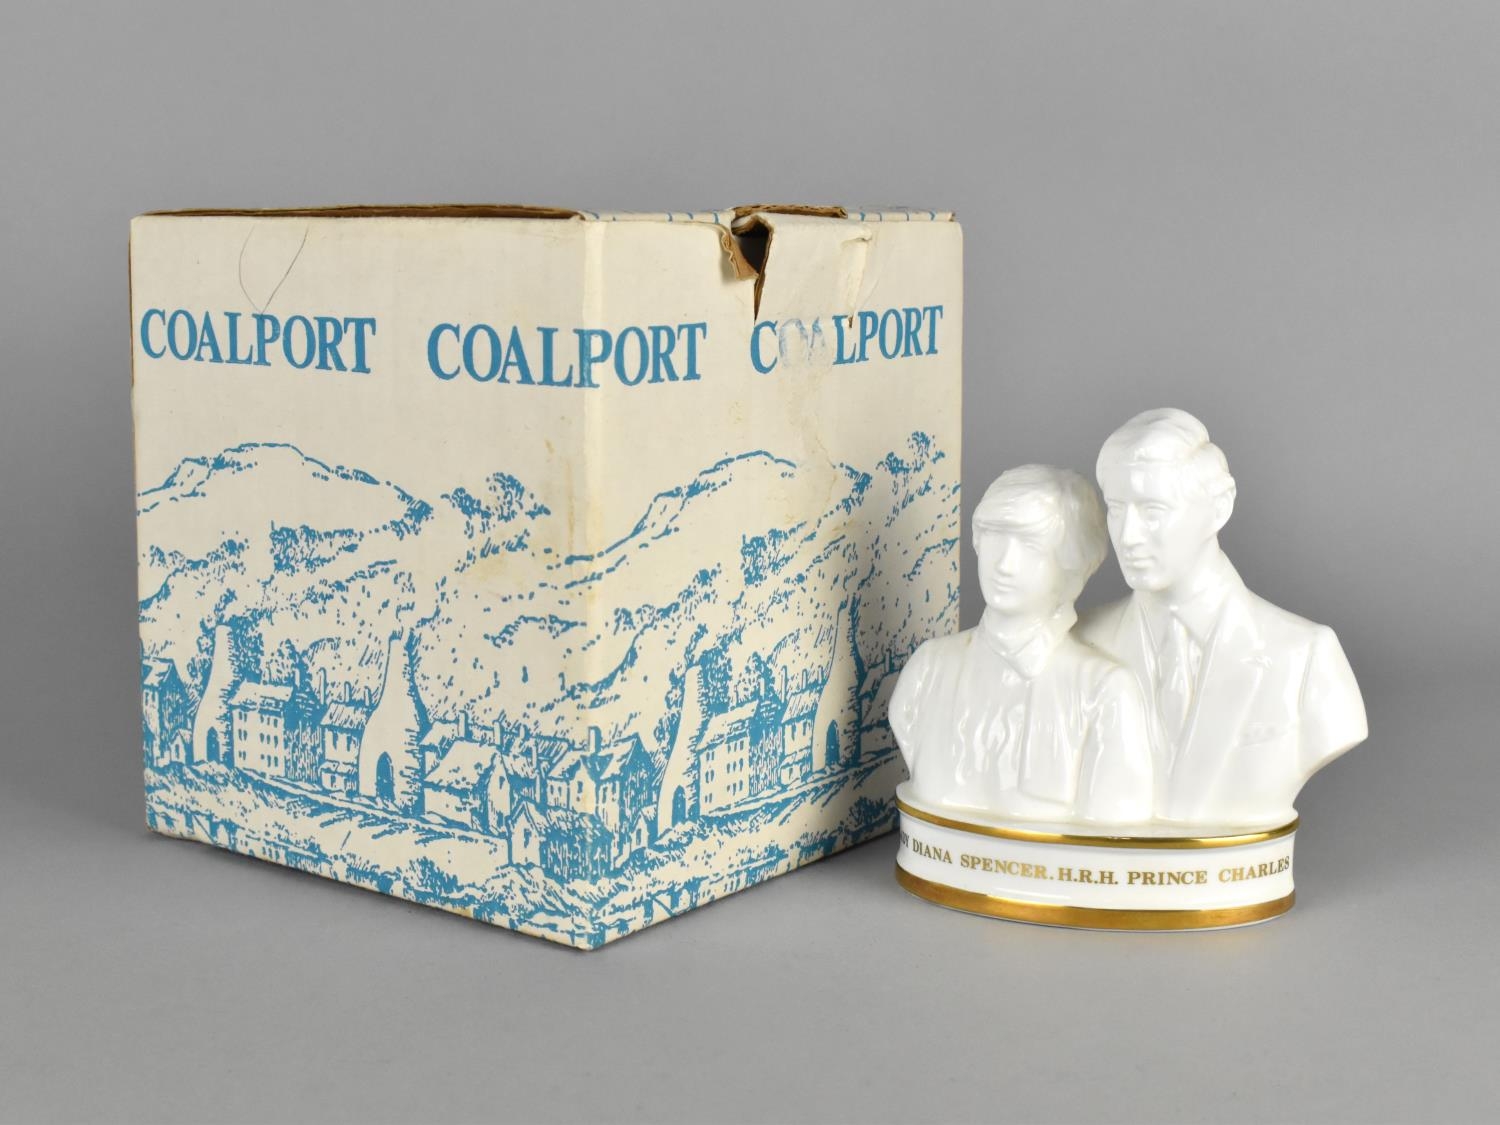 A Limited Edition Coalport Bust of Lady Diana and Prince Charles, 35/250 - Image 3 of 3